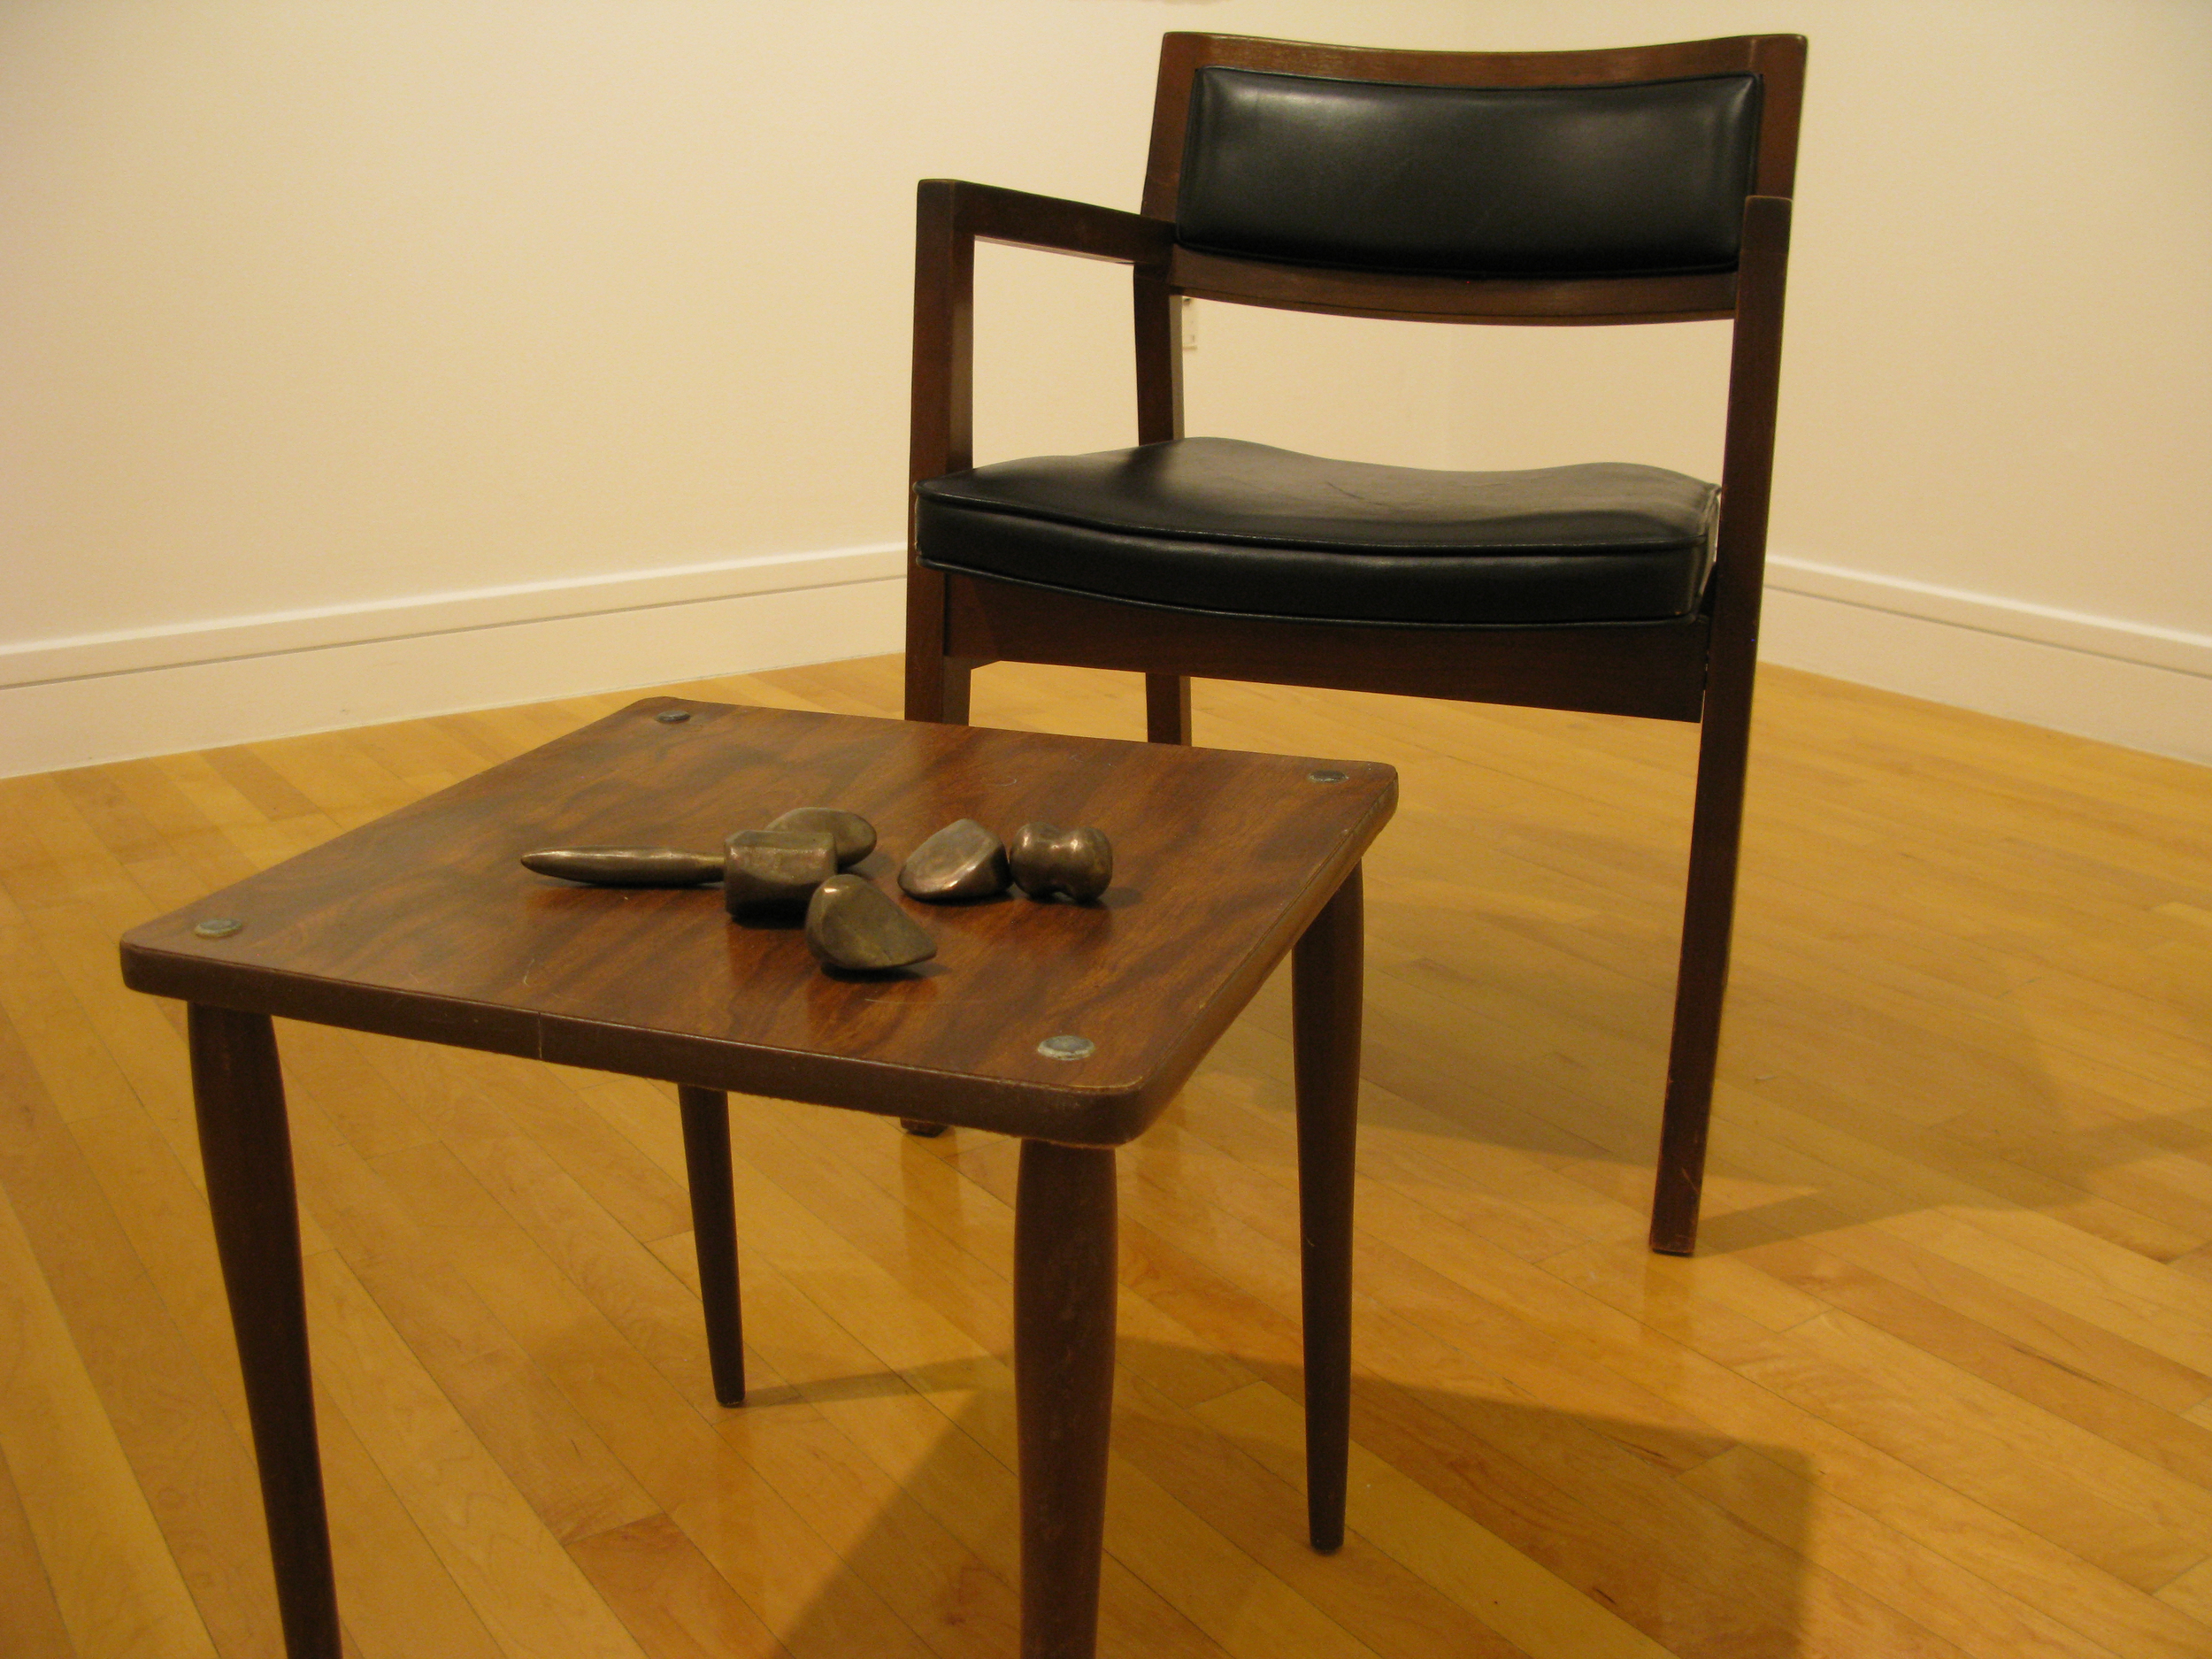  Hunter-Gatherer  found chair and table, solid bronze objects  2011  Approx. 20 x 30 x 40 in. 